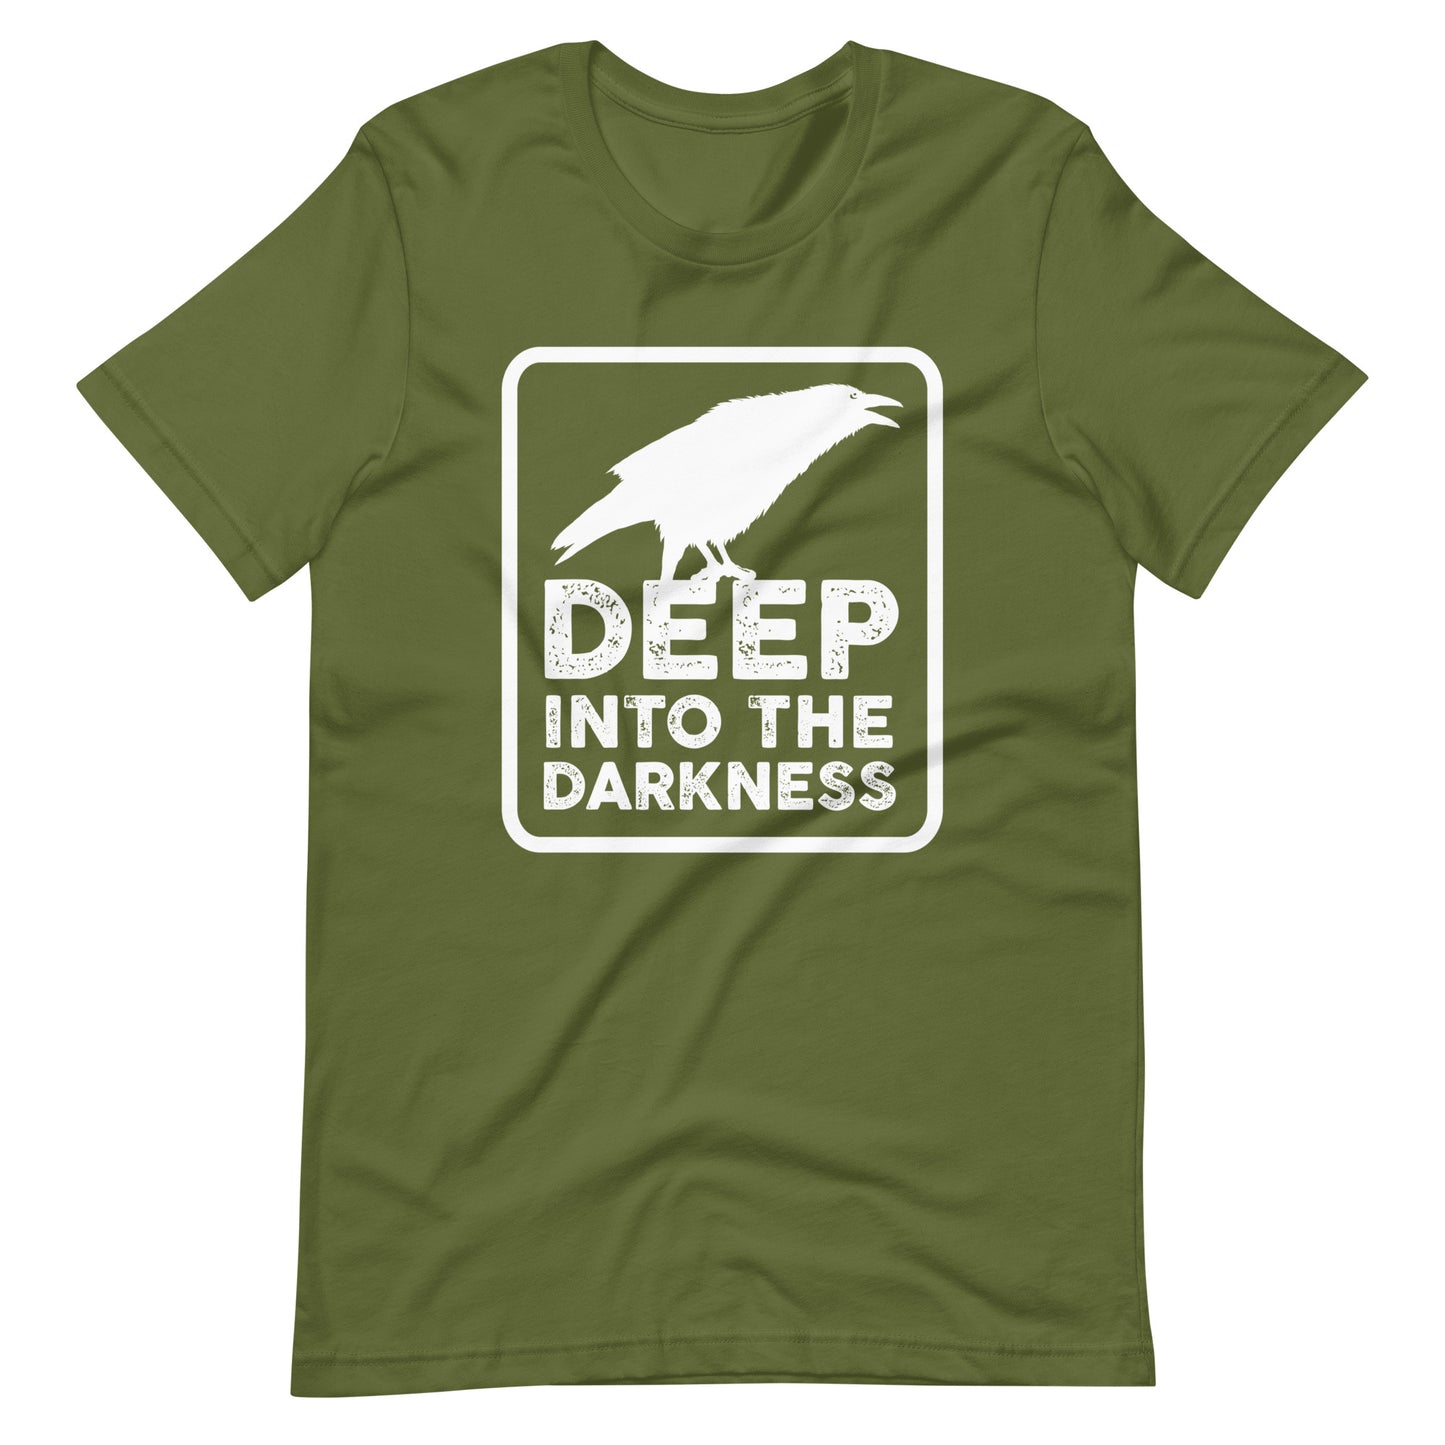 Raven Deep Into the Darkness - Men's t-shirt - Olive Front